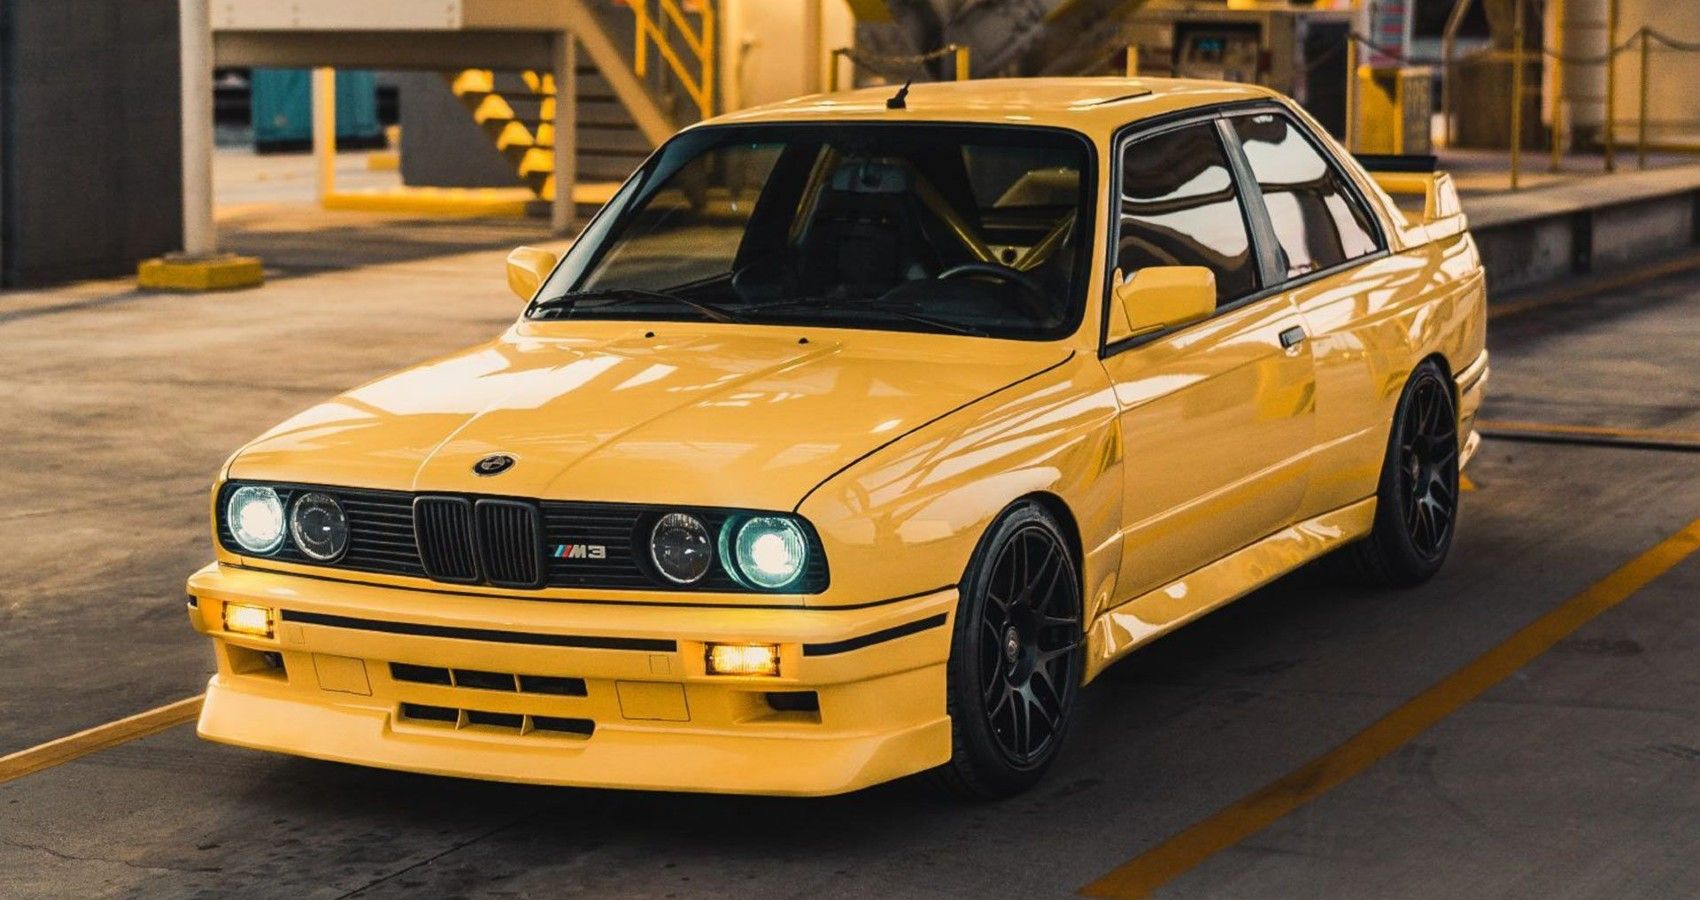 Features of the BMW M3 E30 USA: Differences to the European model